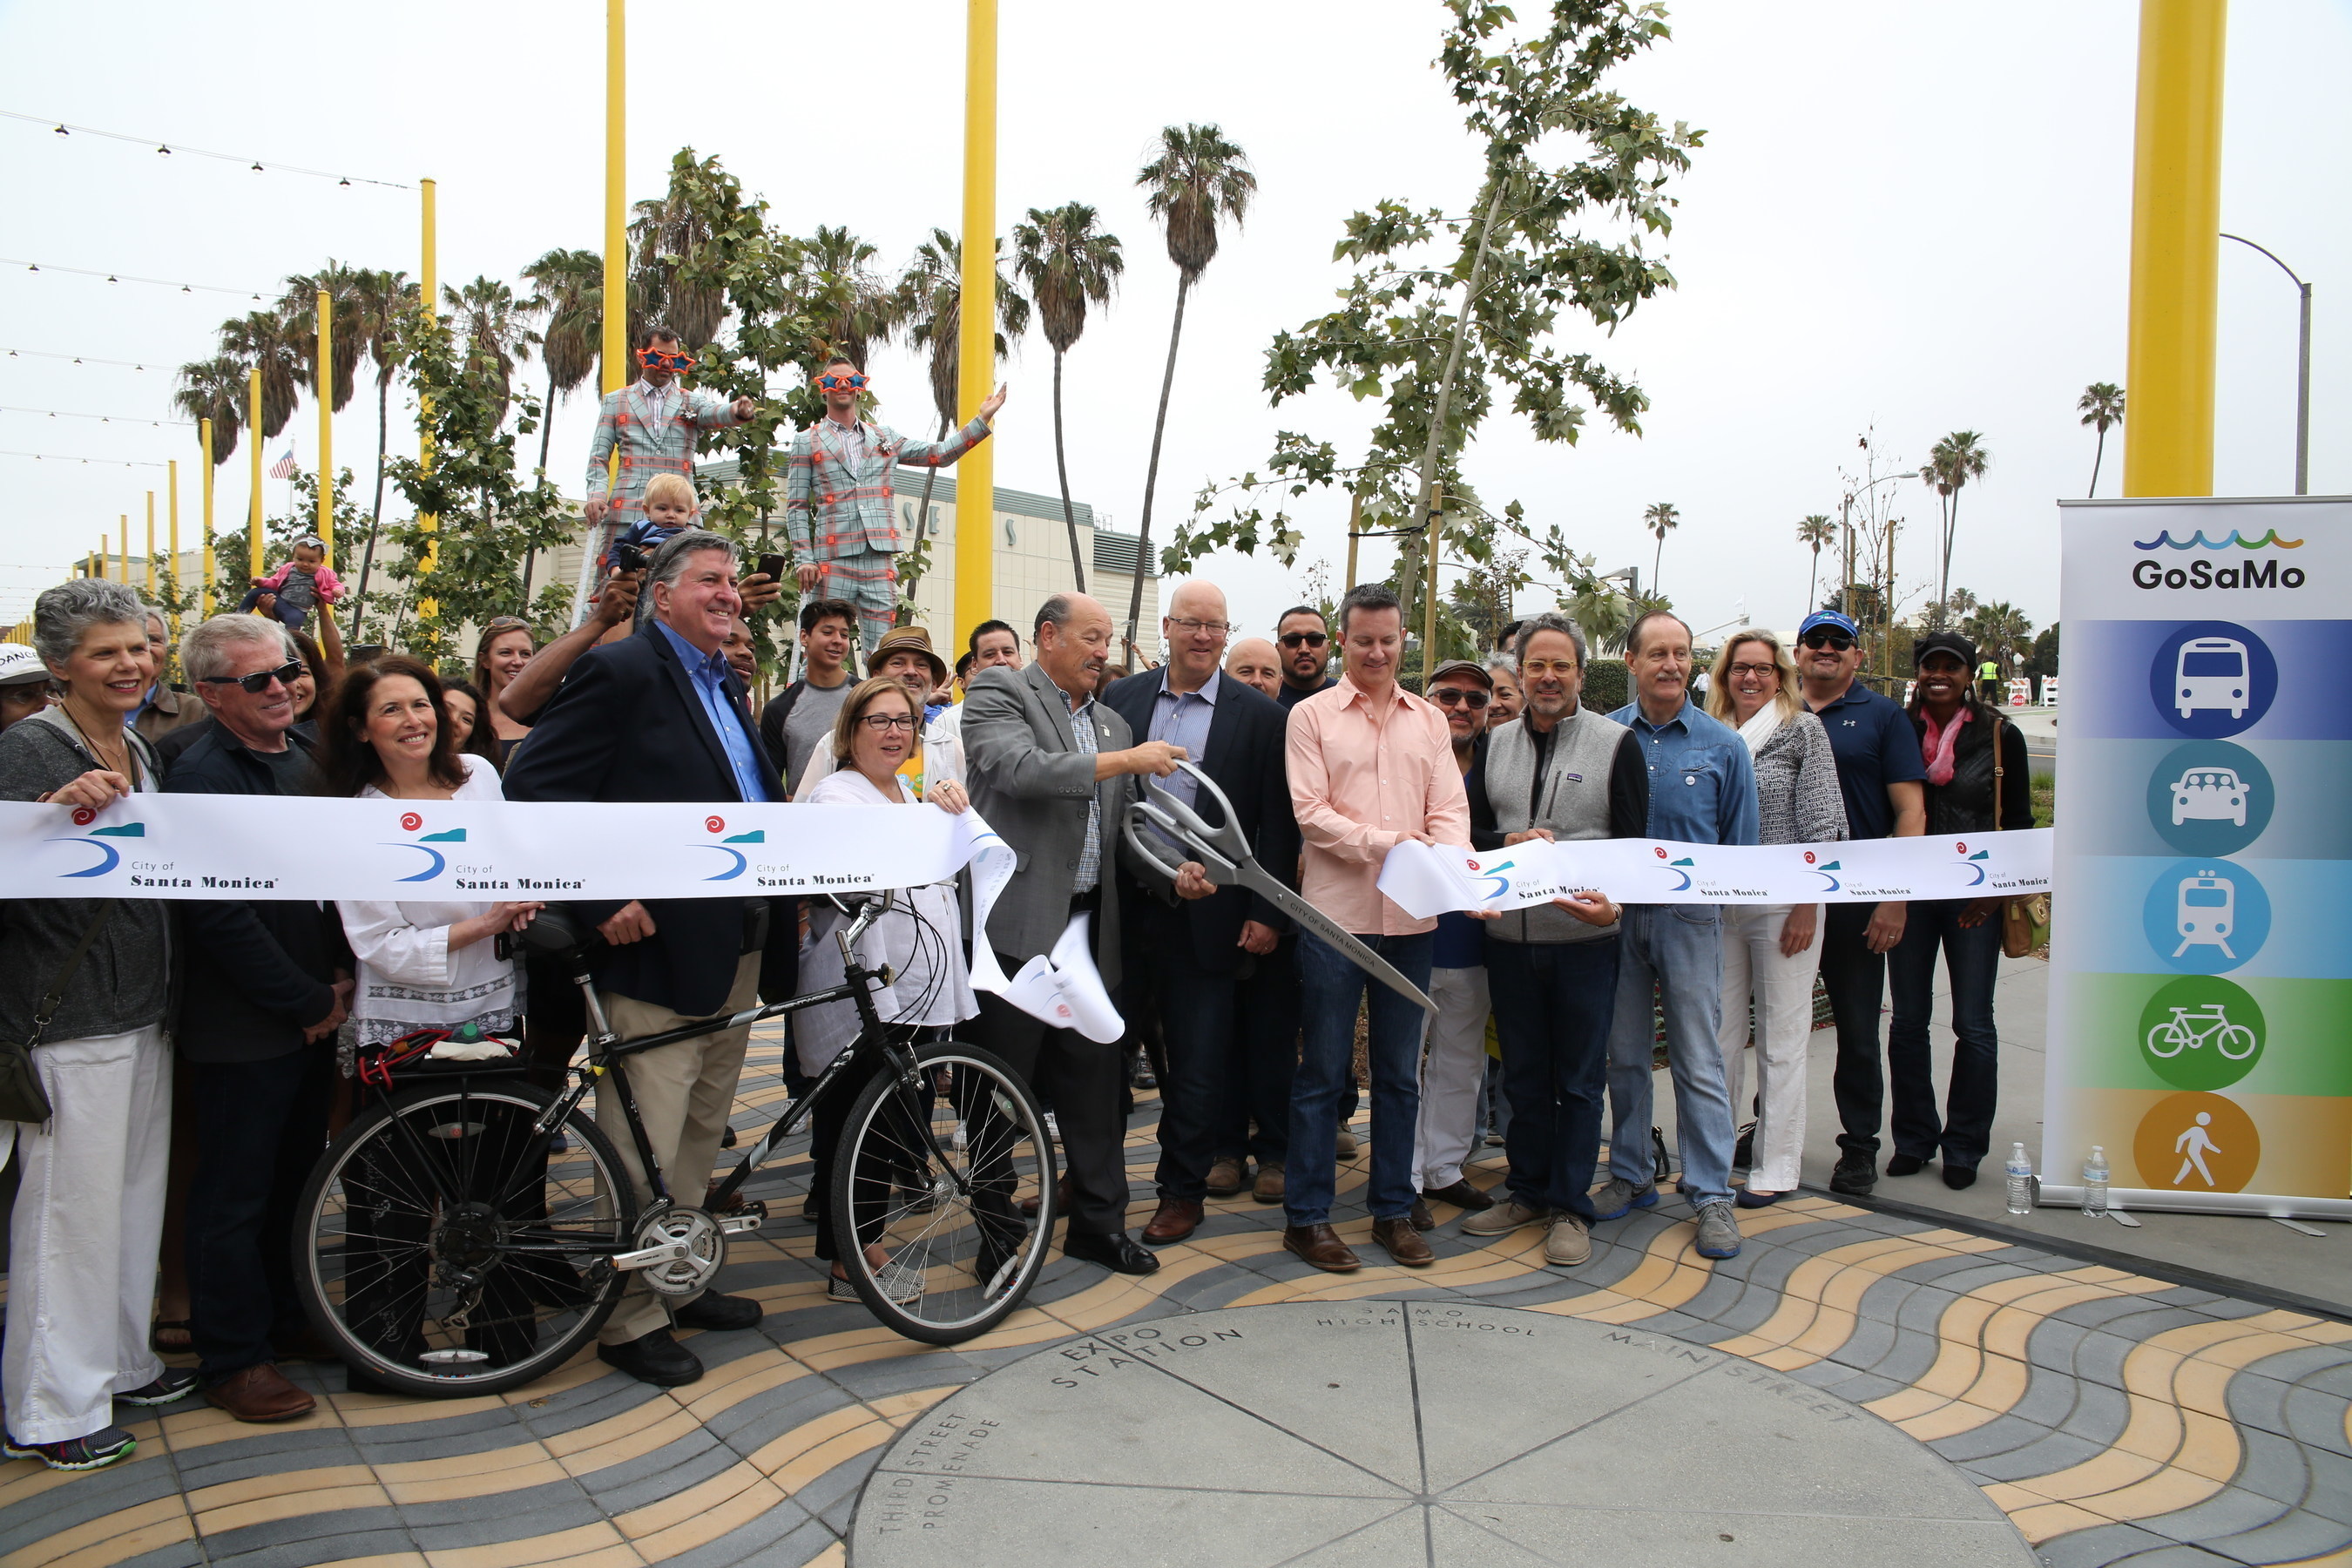 Santa Monica Mayor Tony Vazquez cuts the ribbon at the grand opening of the Colorado Esplanade, a new pedestrian and bikeway connecting the Downtown Santa Monica Expo Station to the Santa Monica Pier. Also photographed (left to right): Assistant City Manager, Elaine Polachek; Construction Manager, Gene Higginbotham; Councilmember Sue Himmelrich; Councilmember Kevin McKeown; Councilmember Gleam Davis; Mayor Tony Vazquez; Mayor Pro Tempore, Ted Winterer; Councilmember Terry O'Day; Metro Executive Officer...